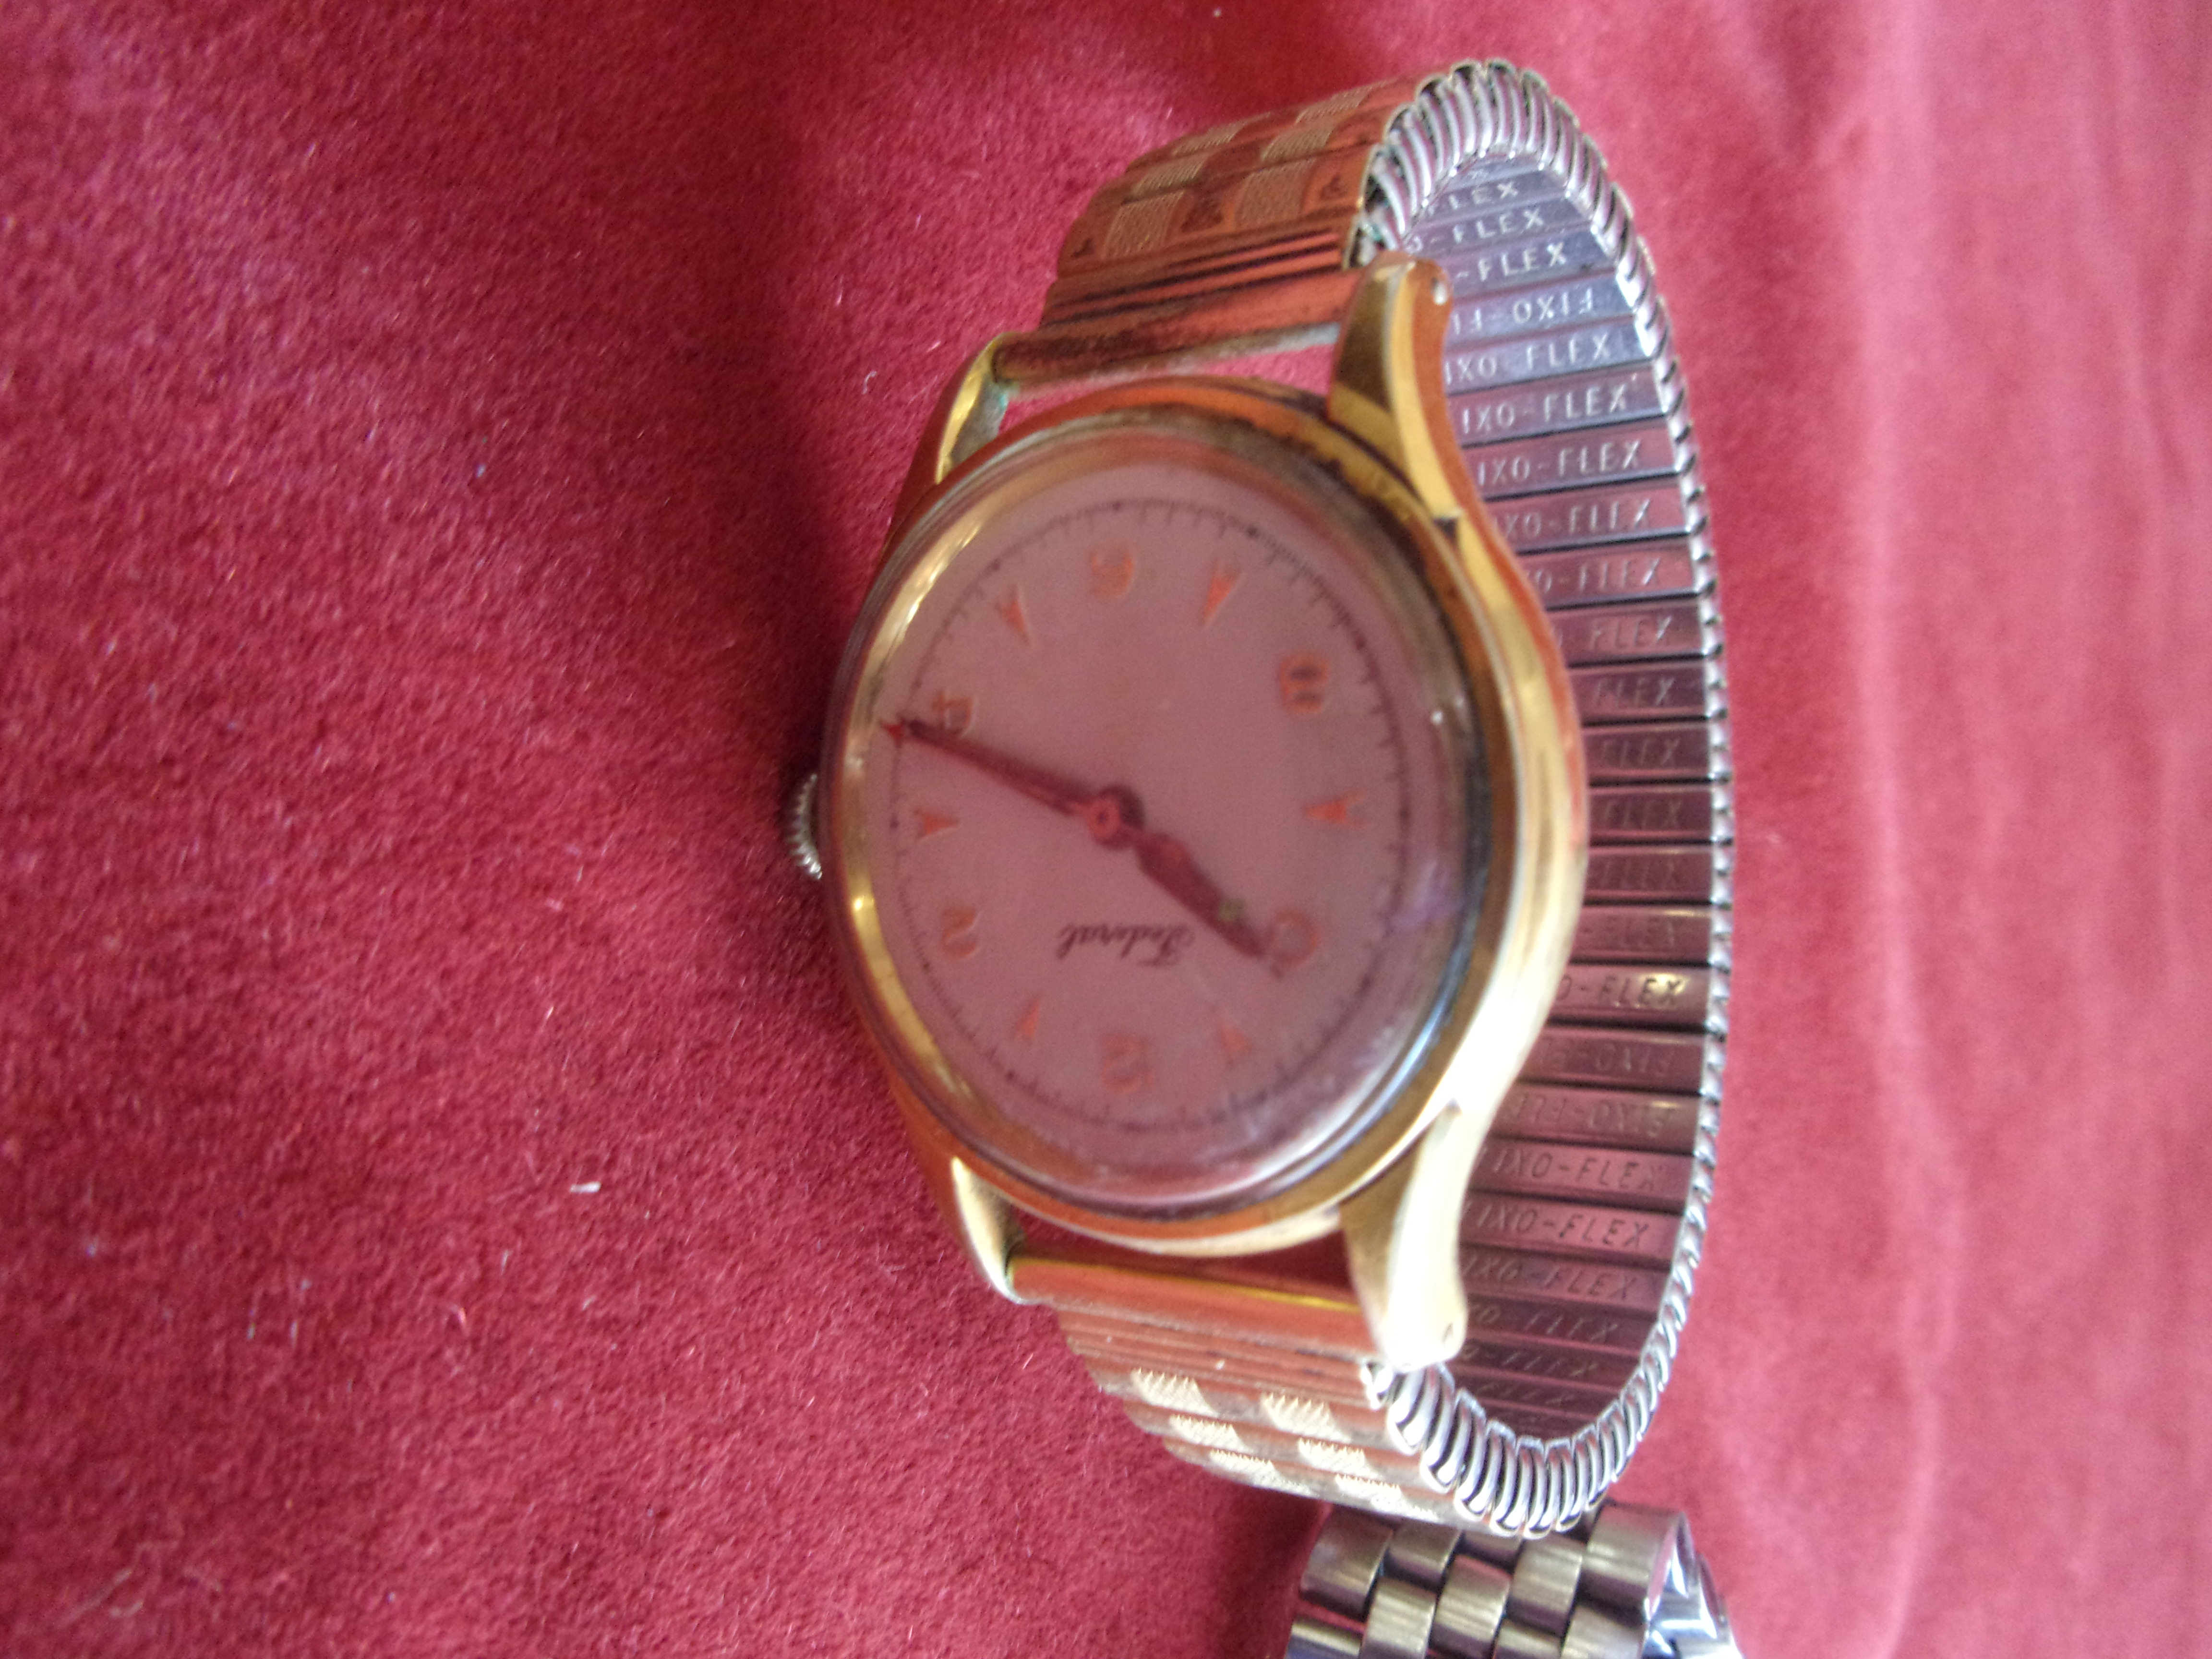 Watch-Federial with second hand in working order- Swiss made-waterproof-Wrist Watch-Gents Seiko - Image 2 of 3